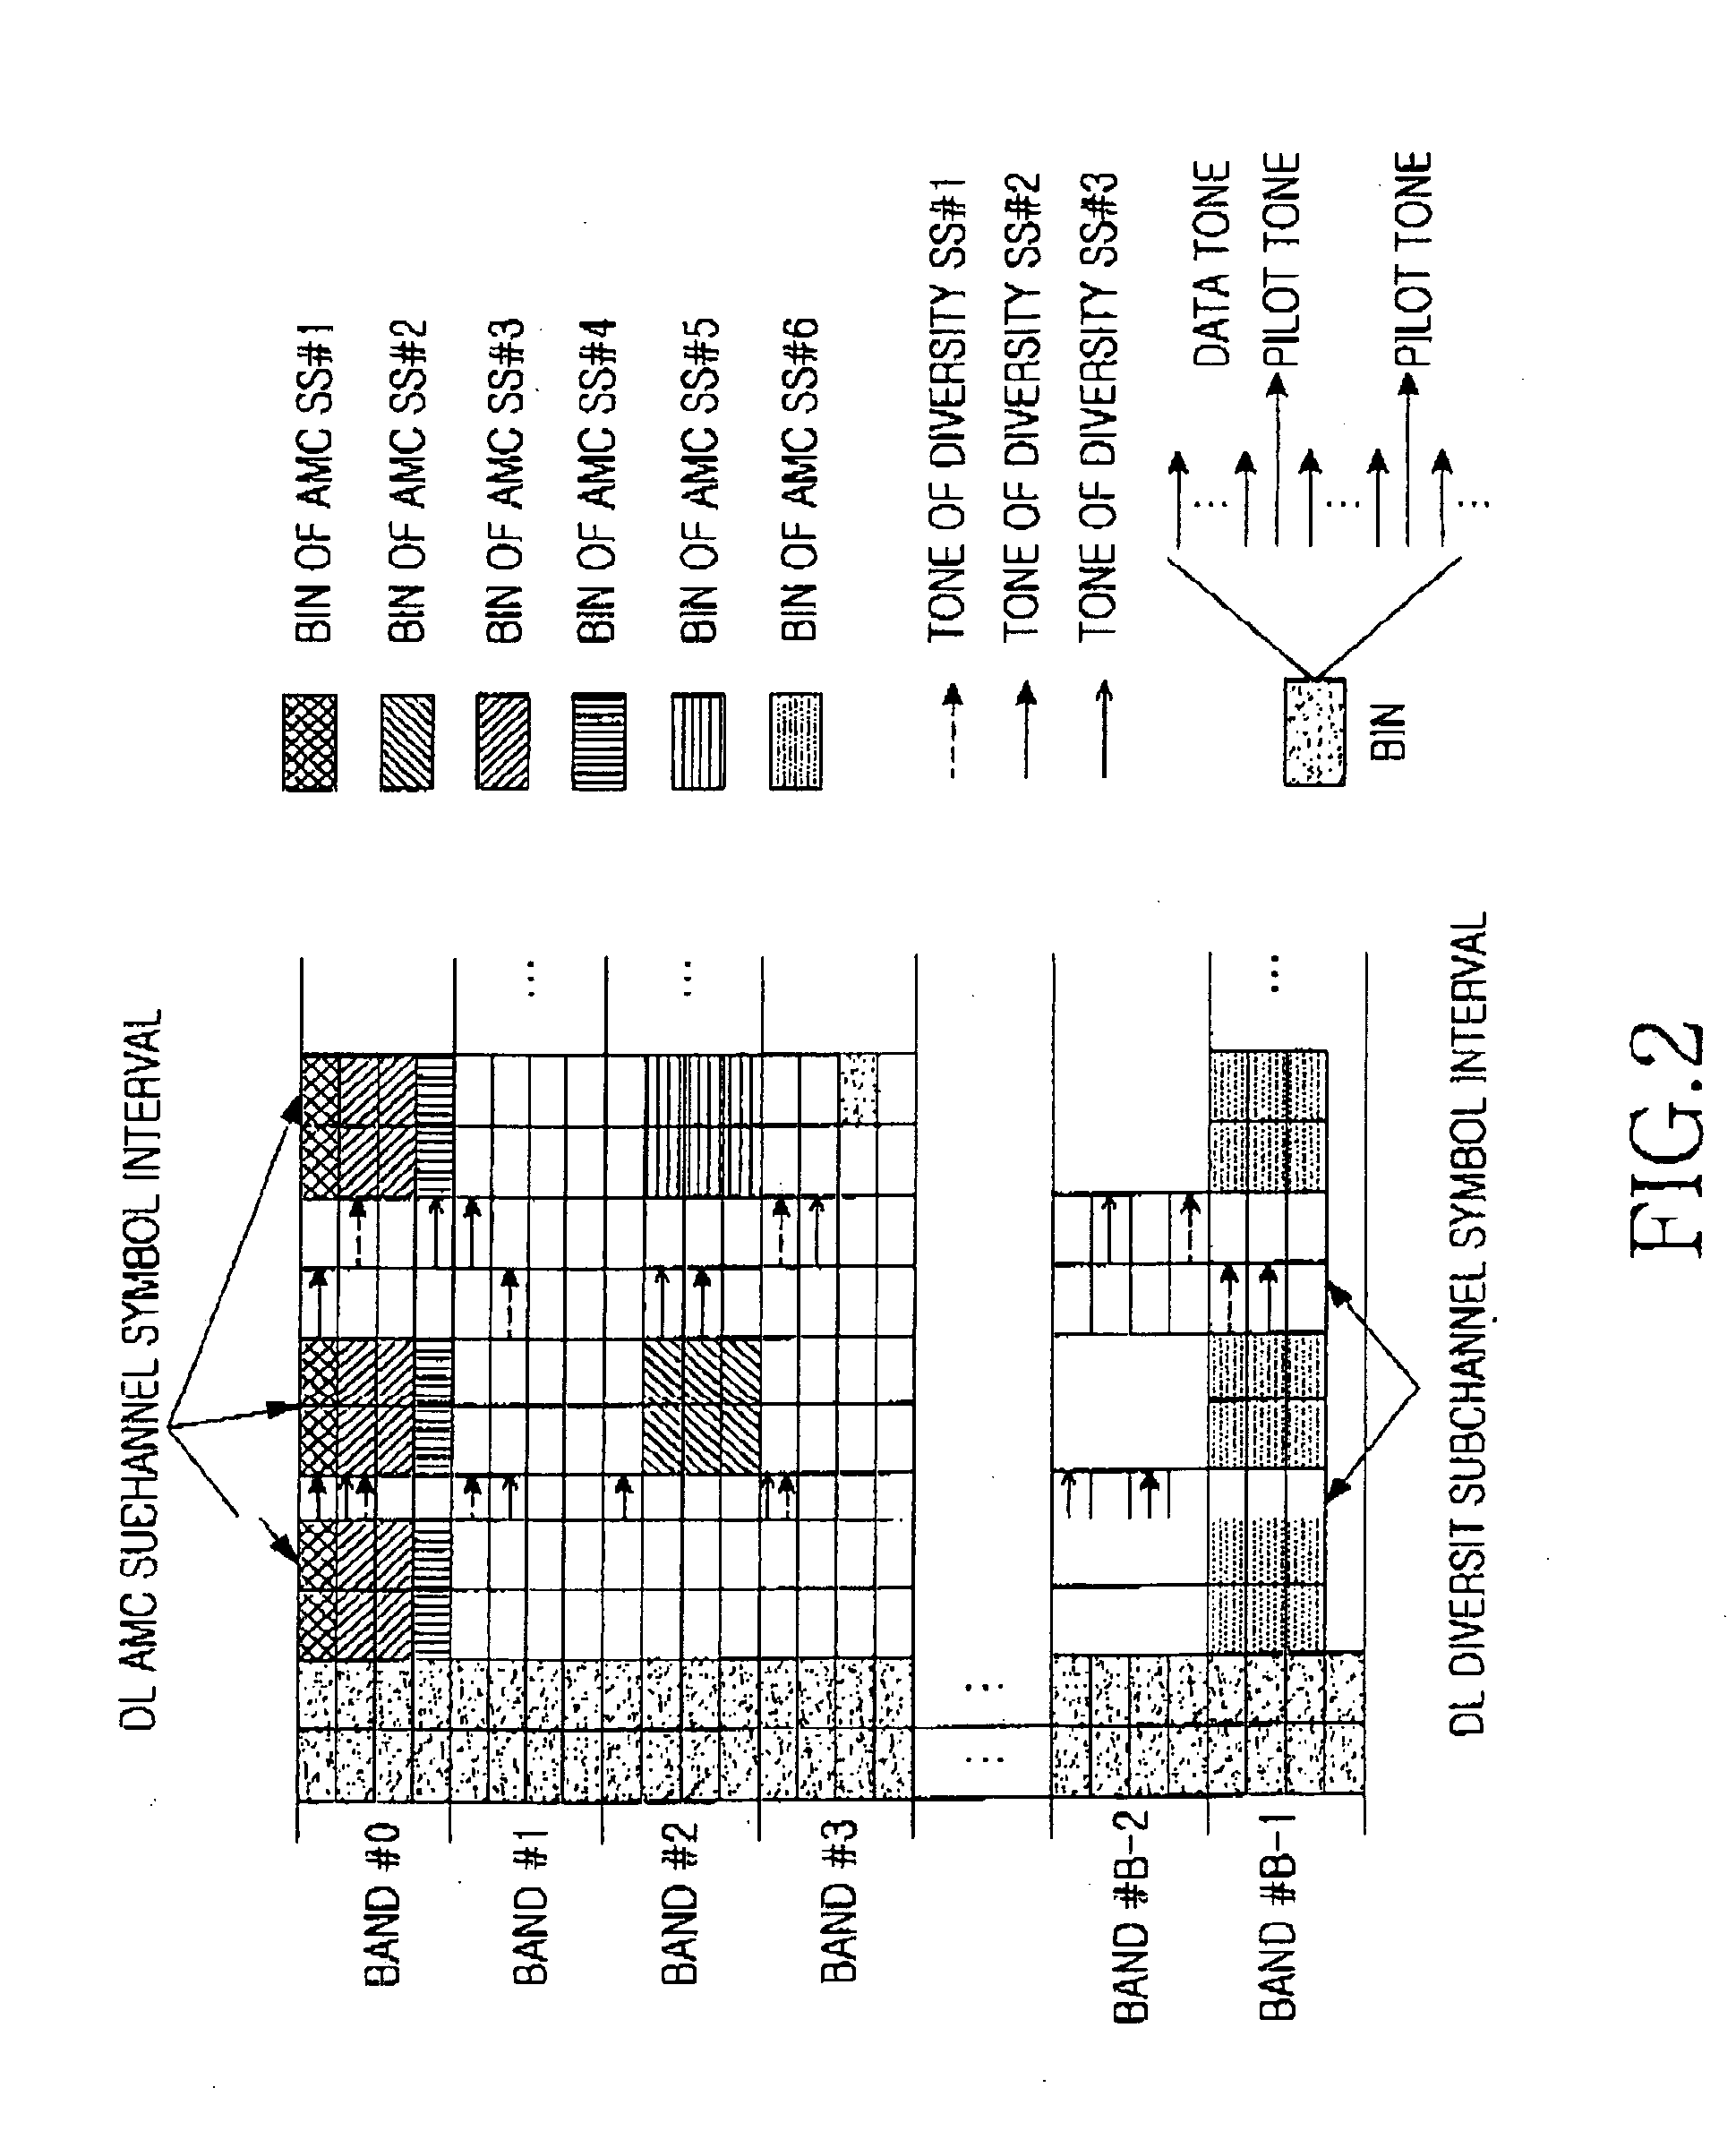 Method for allocating a subchannel in an orthogonal frequency division multiple access cellular communication system